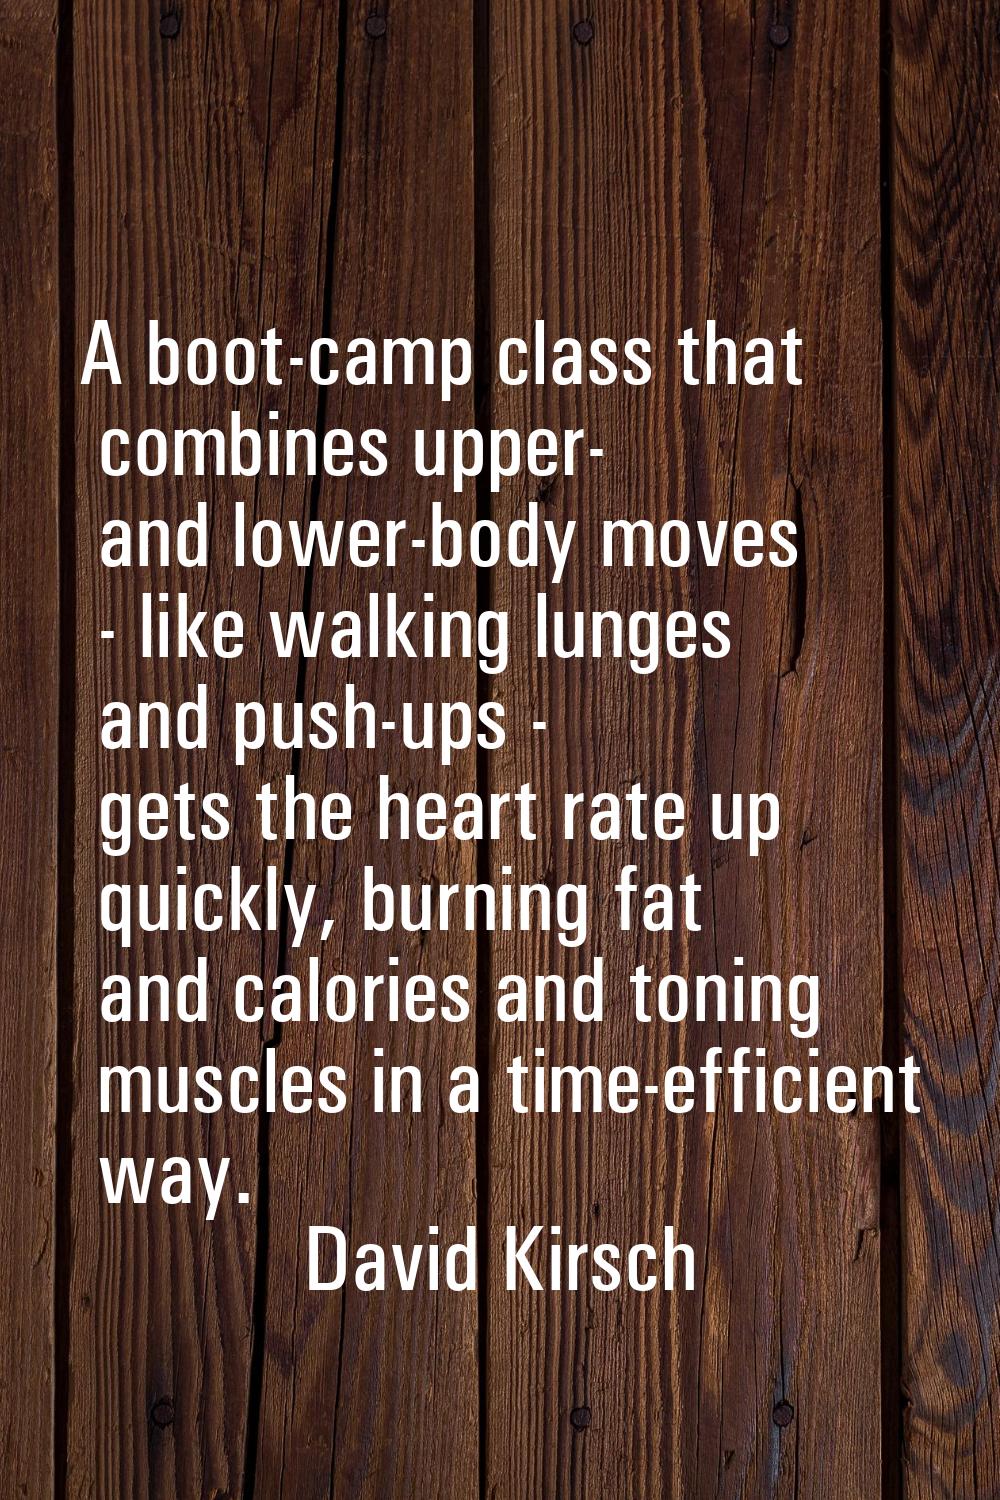 A boot-camp class that combines upper- and lower-body moves - like walking lunges and push-ups - ge